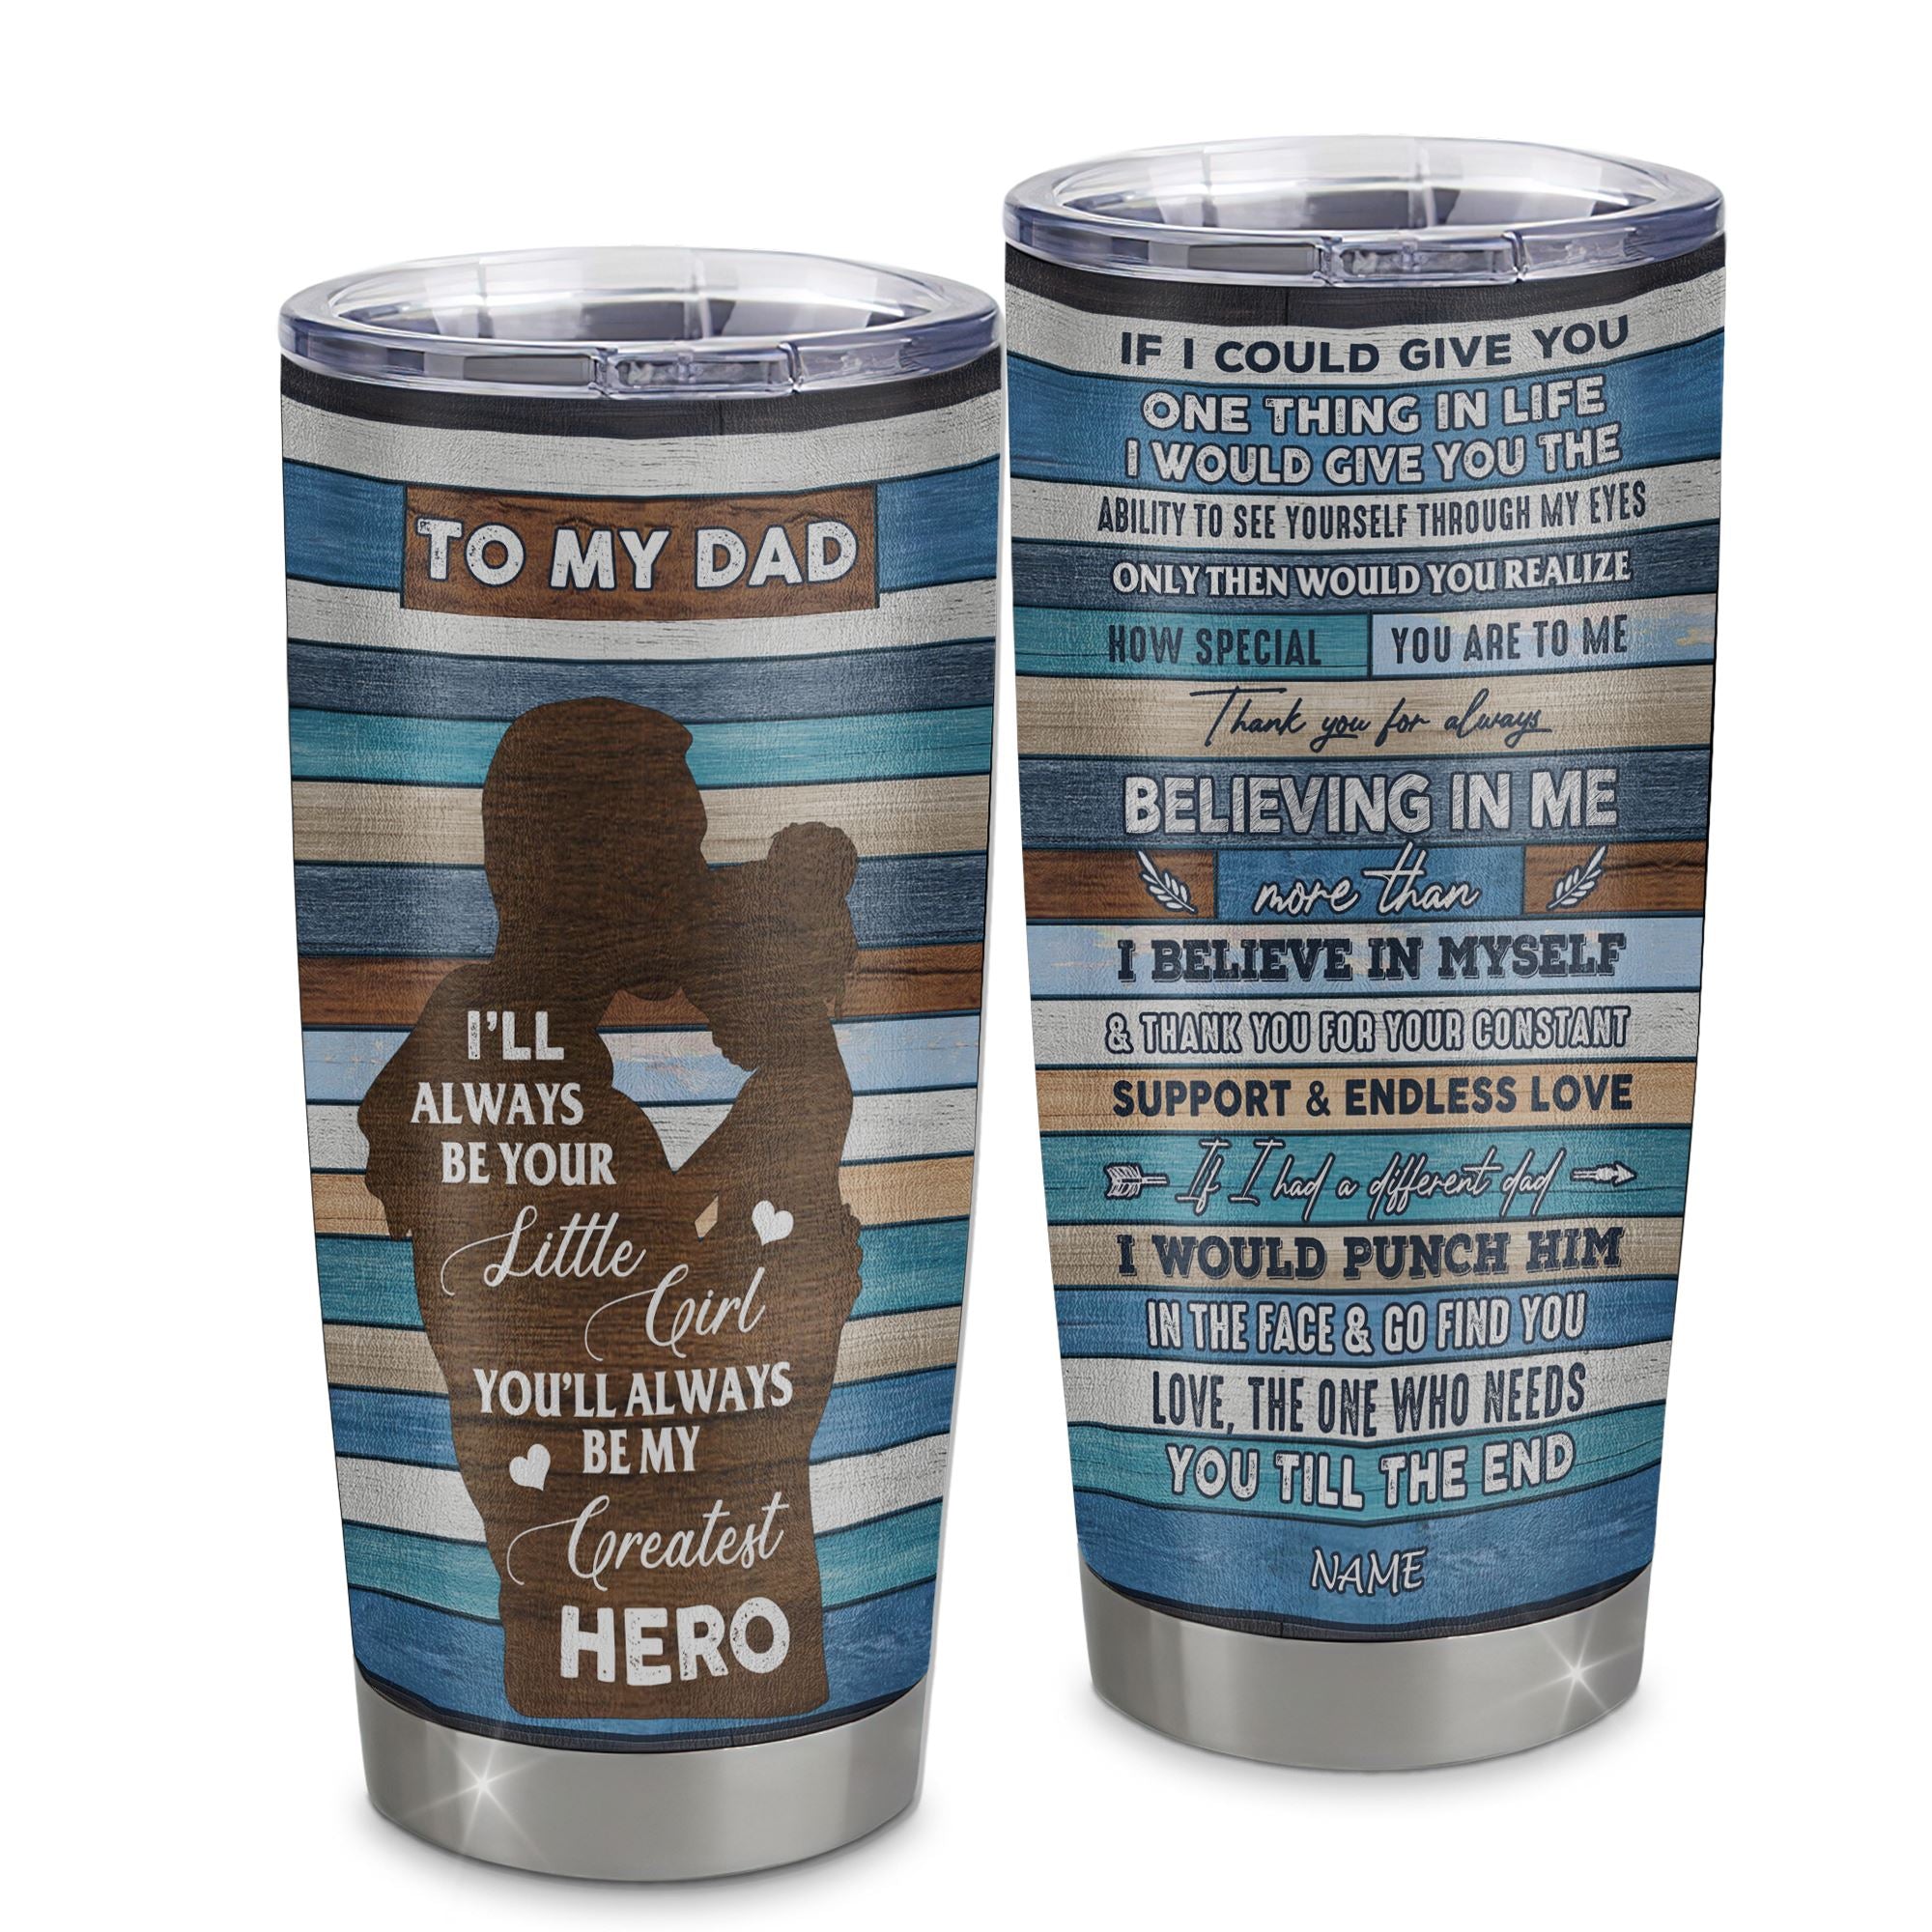 Personalized_To_My_Dad_From_Daughter_Stainless_Steel_Tumbler_Cup_Wood_Little_Girl_Thank_You_Dad_Fathers_Day_Birthday_Christmas_Travel_Mug_Tumbler_mockup_1.jpg